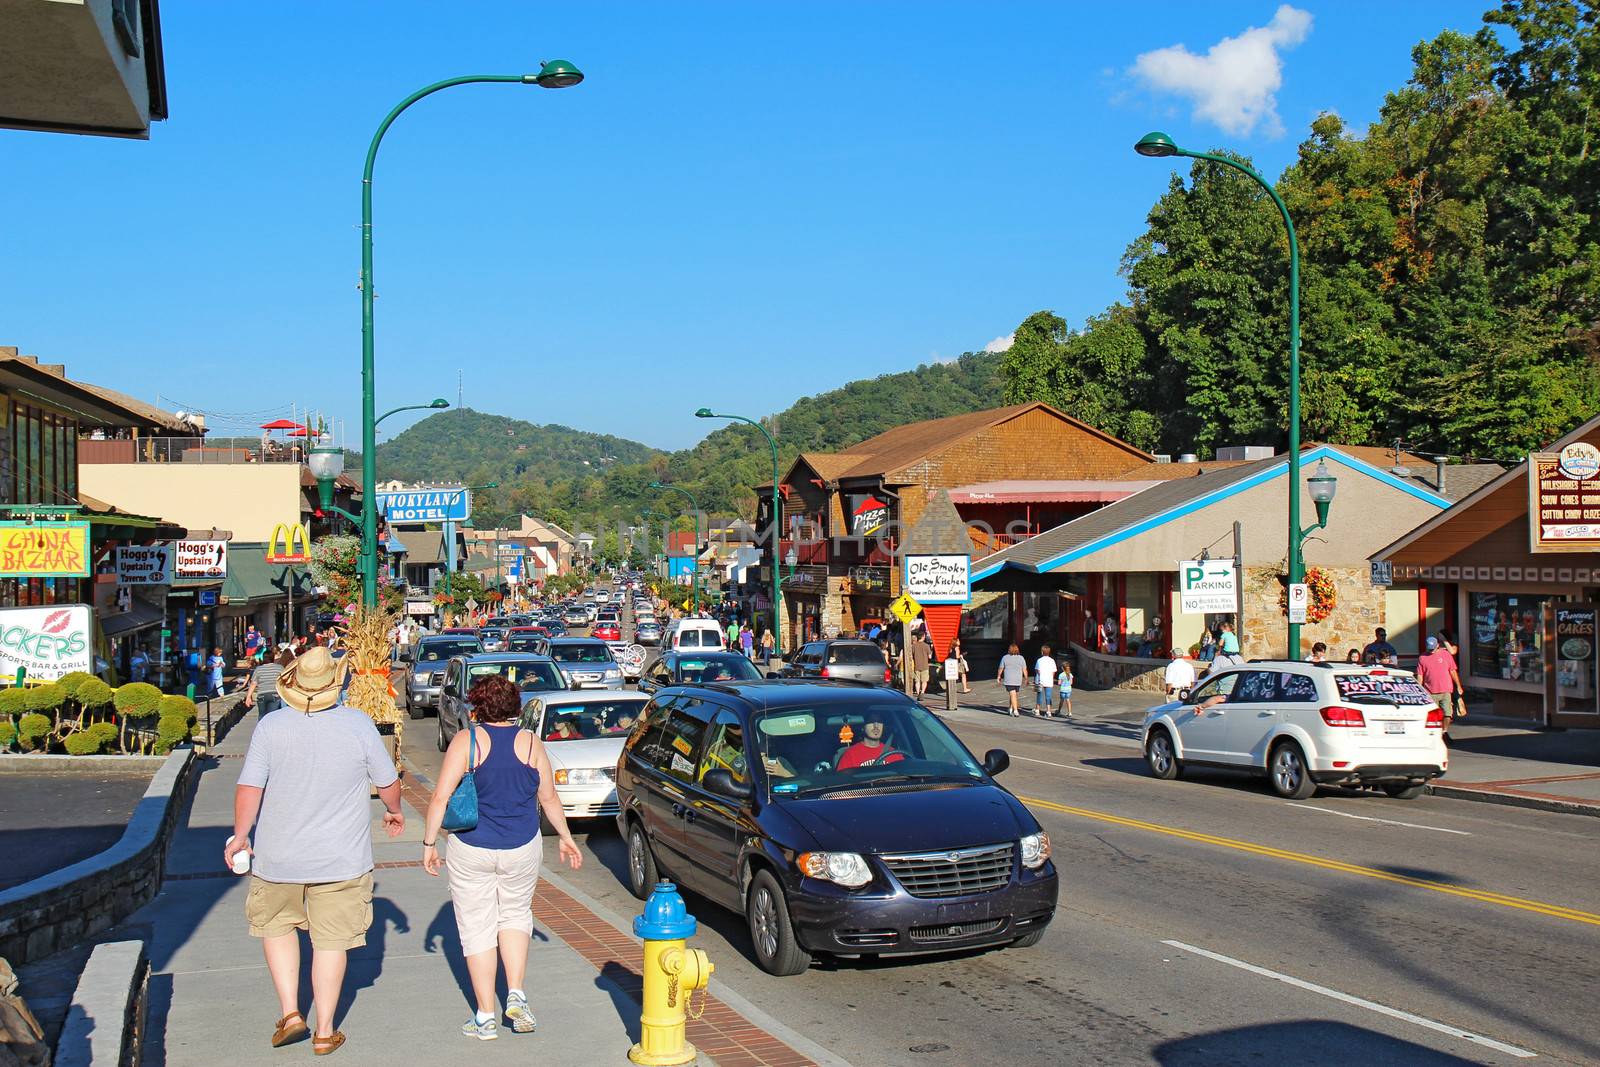 Tourists and traffic along the main road through Gatlinburg, Ten by sgoodwin4813